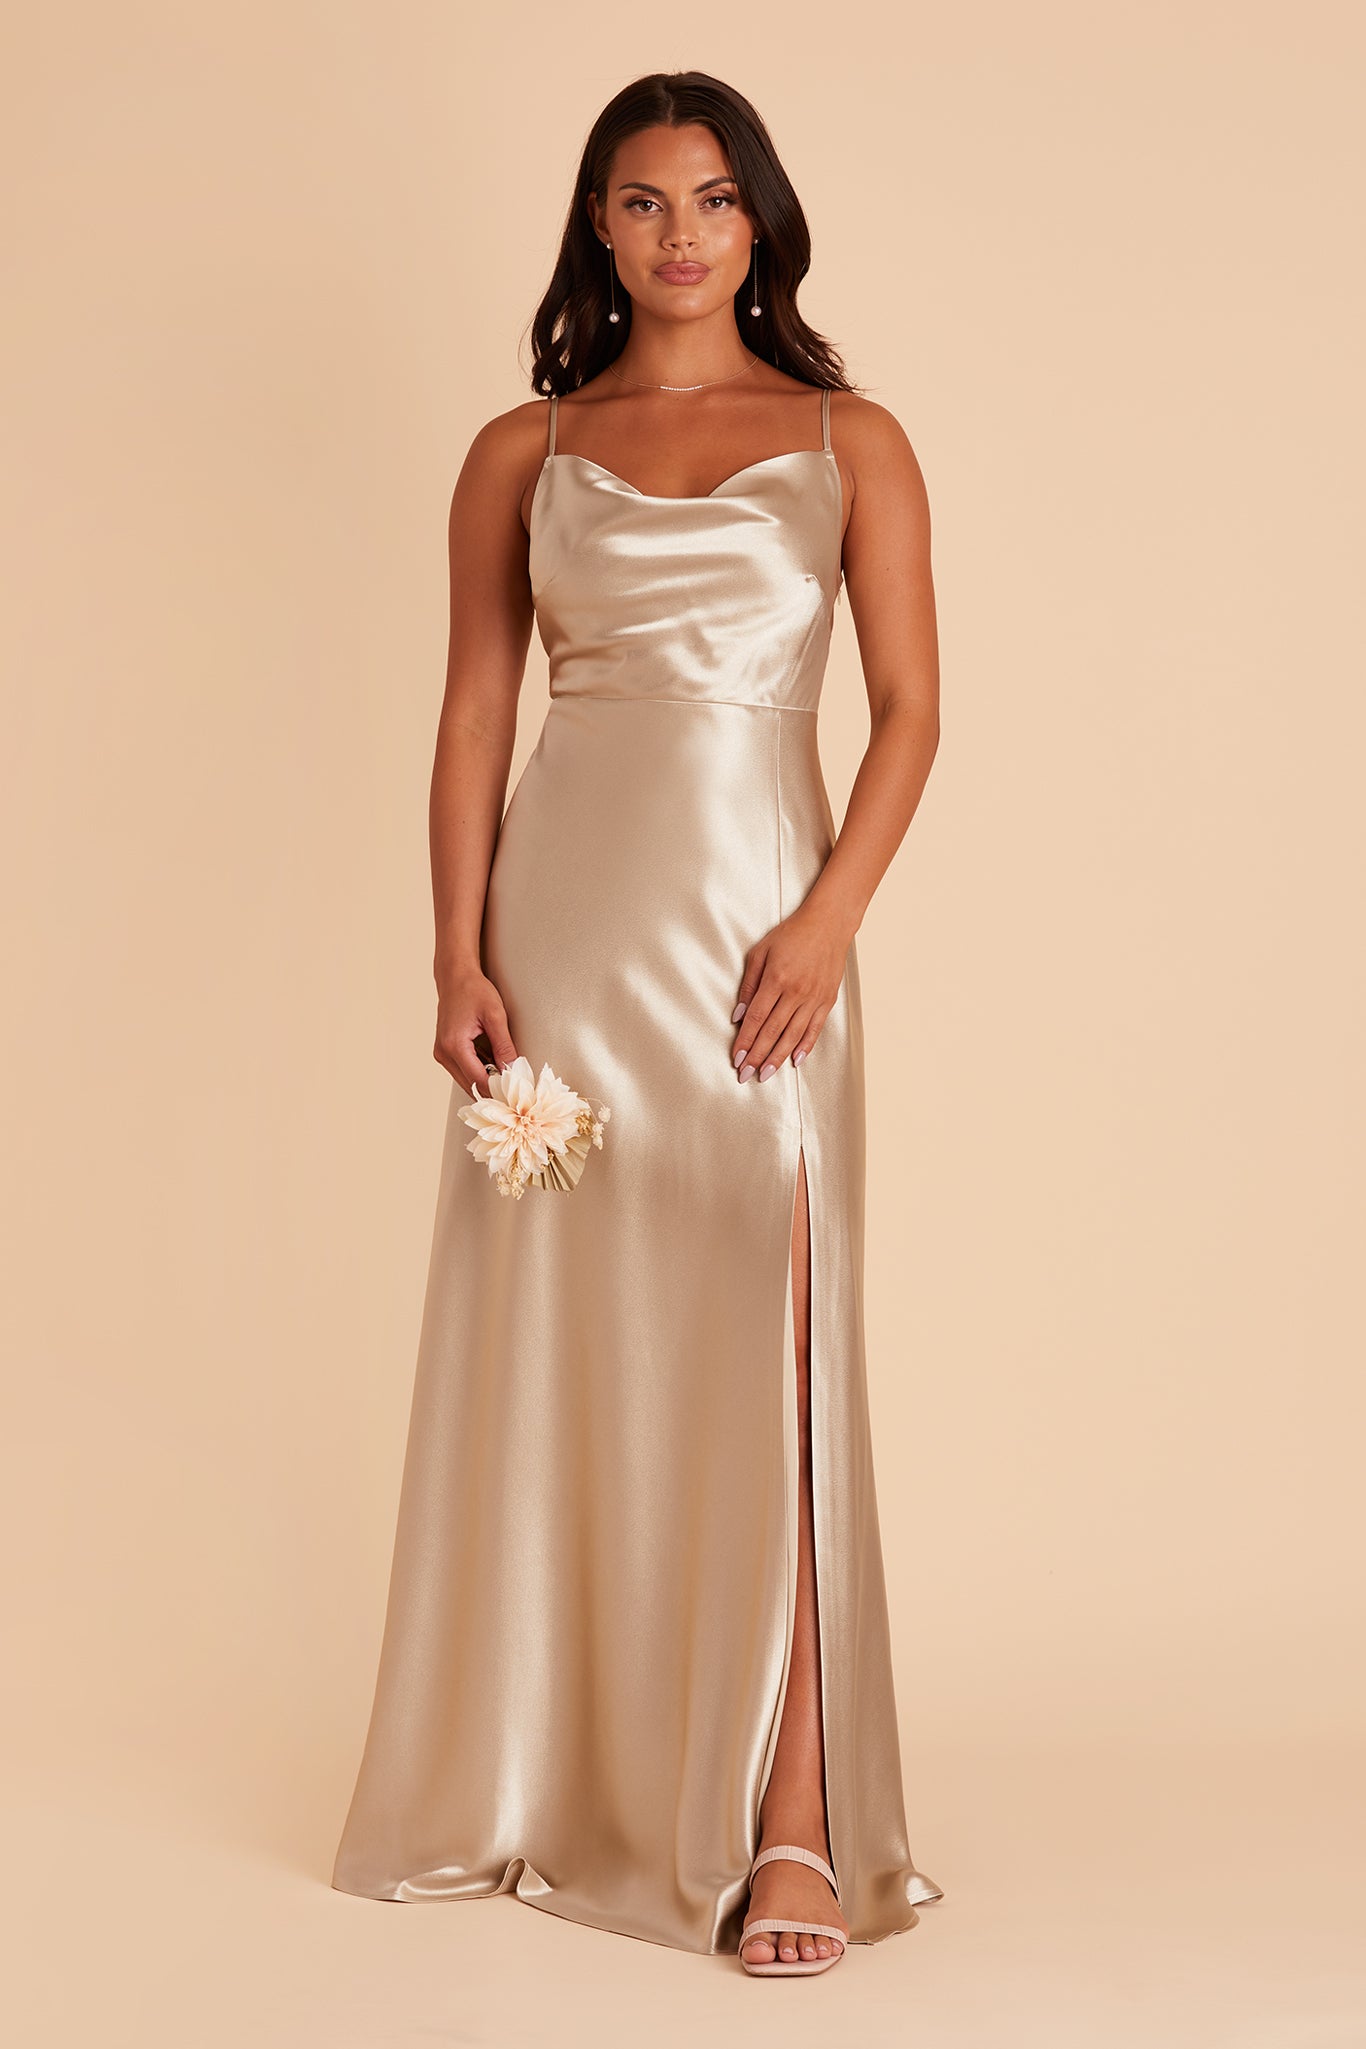 Front view of the Lisa Long Dress in neutral champagne satin shows a model revealing their leg and foot in the mid-thigh slit. They wear the Natalie Chunky Heel shoes in nude blush.